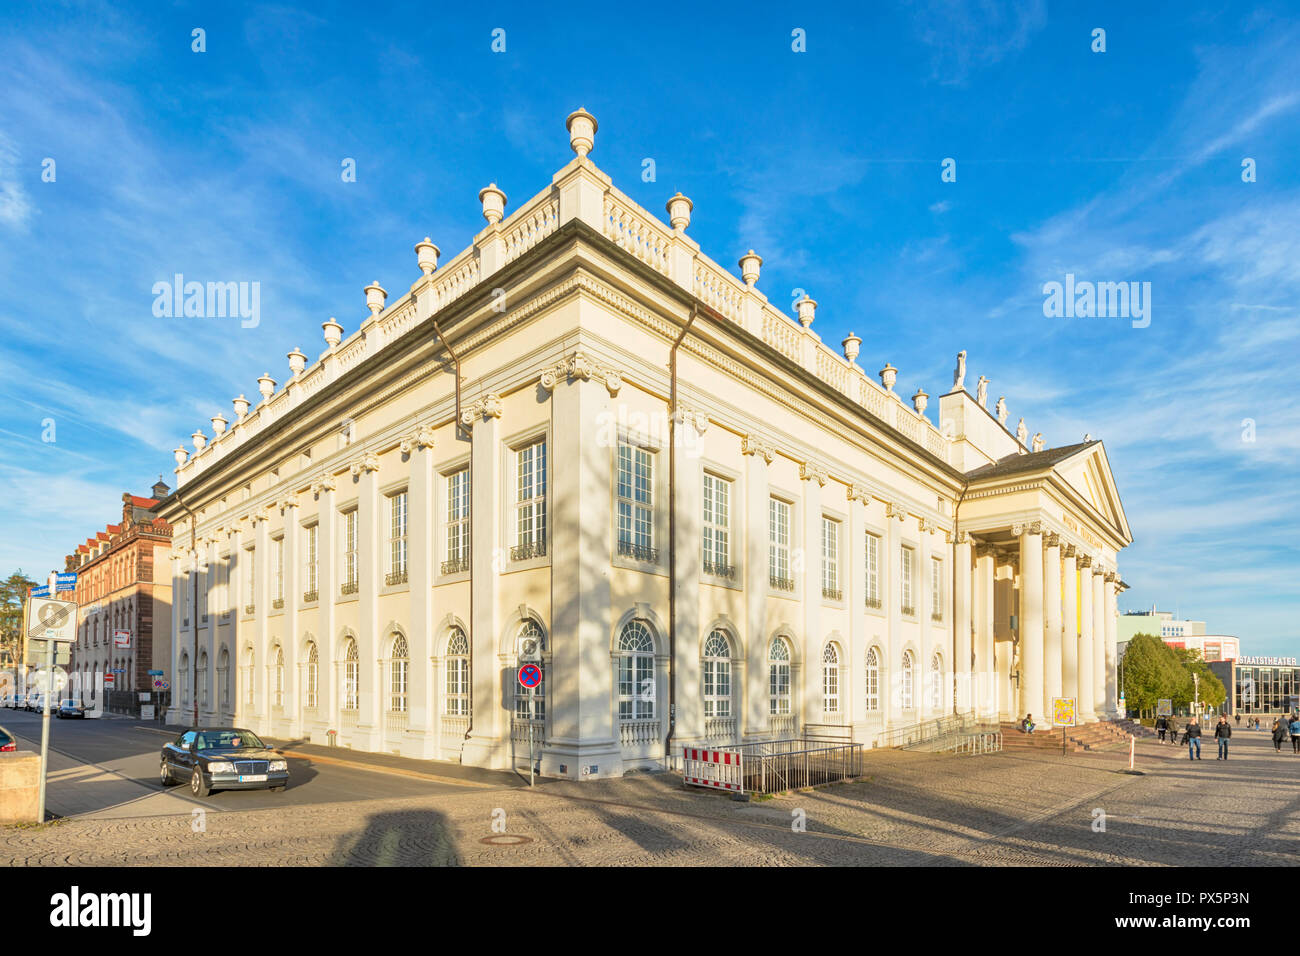 Fridericianum, world’s first public museum and center of quinquennial documenta exhibitions at Kassel, Hesse, Germany Stock Photo